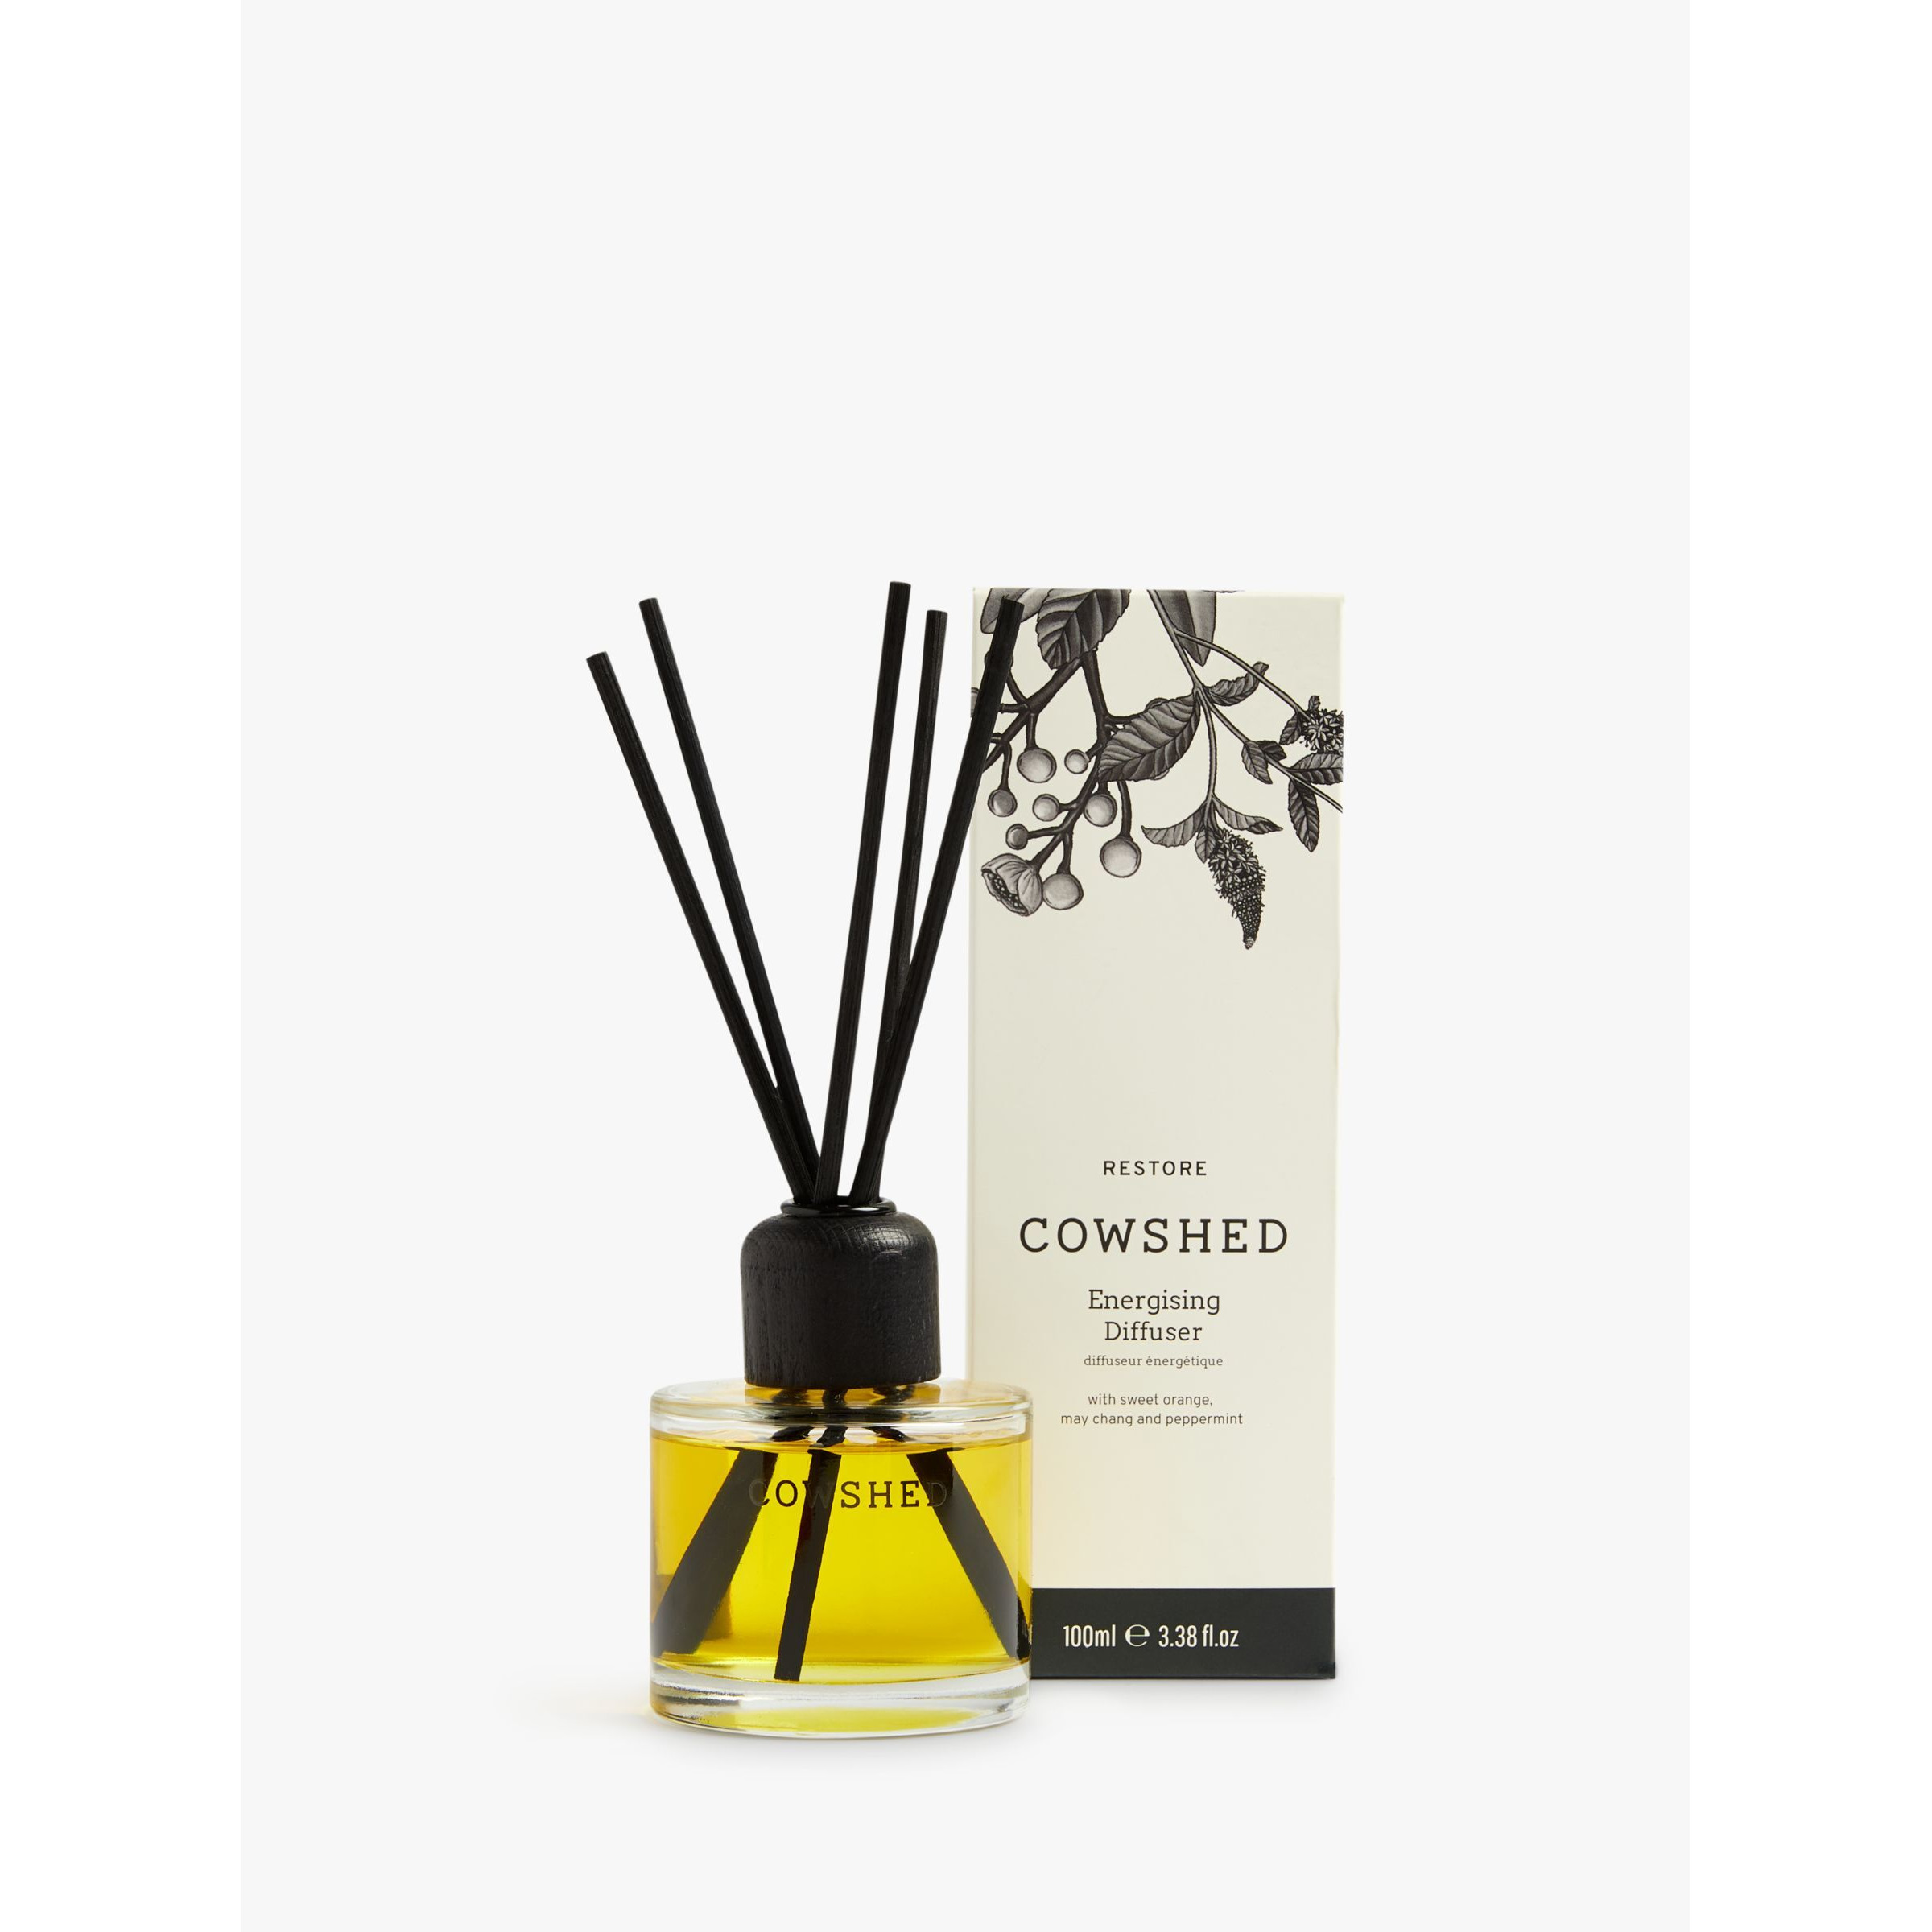 Cowshed Restore Energisng Diffuser, 100ml - image 1